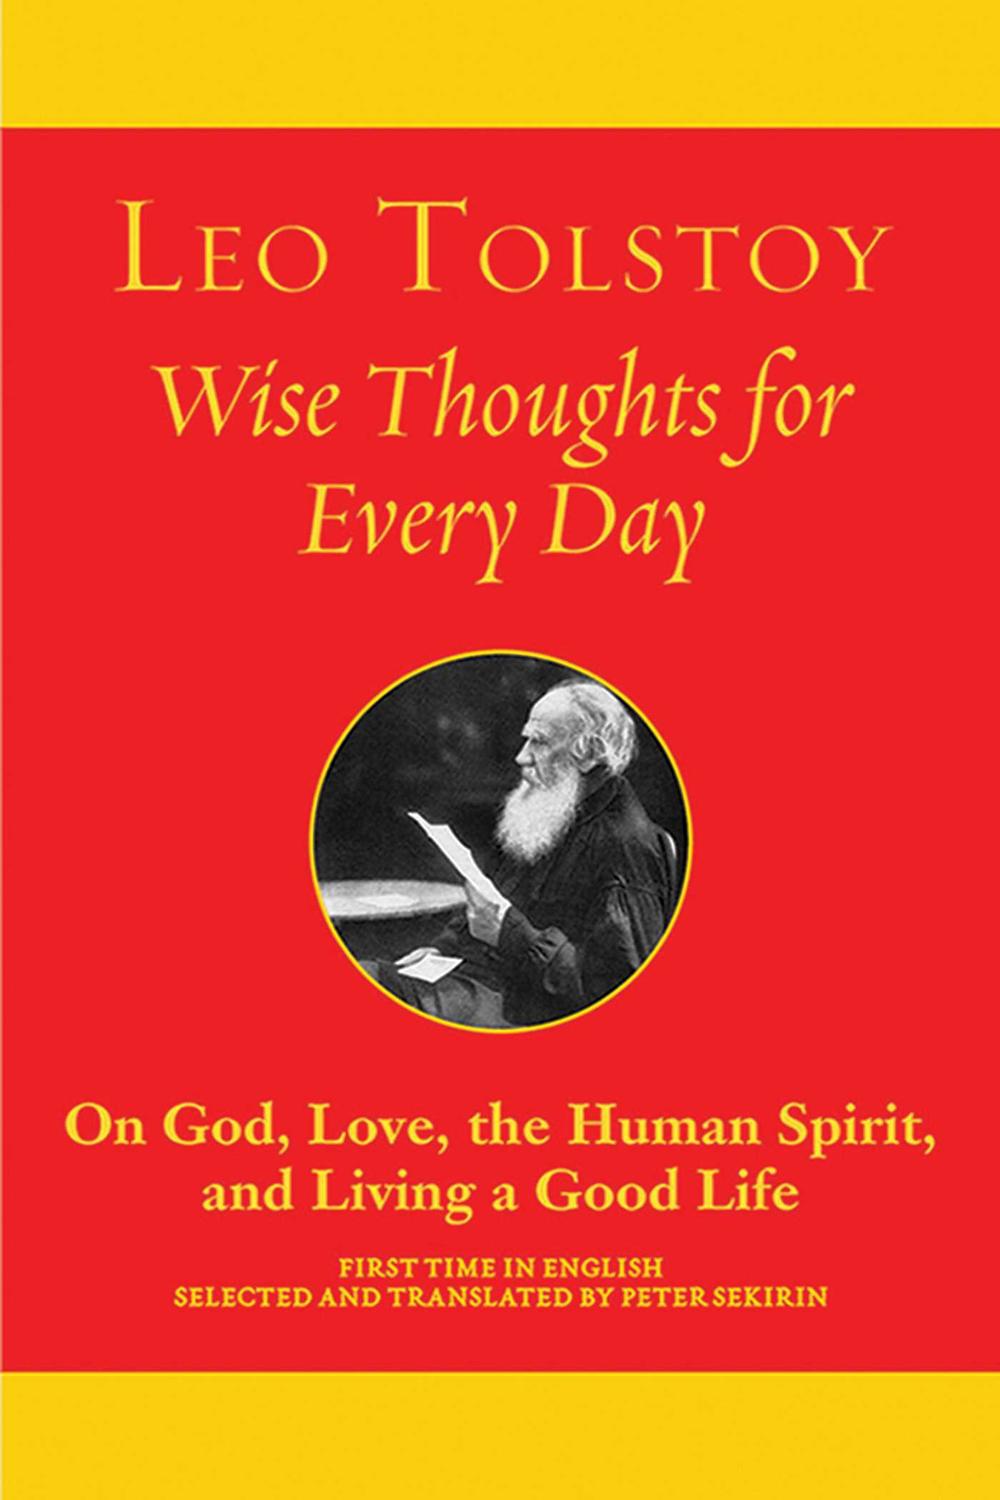 Wise Thoughts for Every Day - Leo Tolstoy